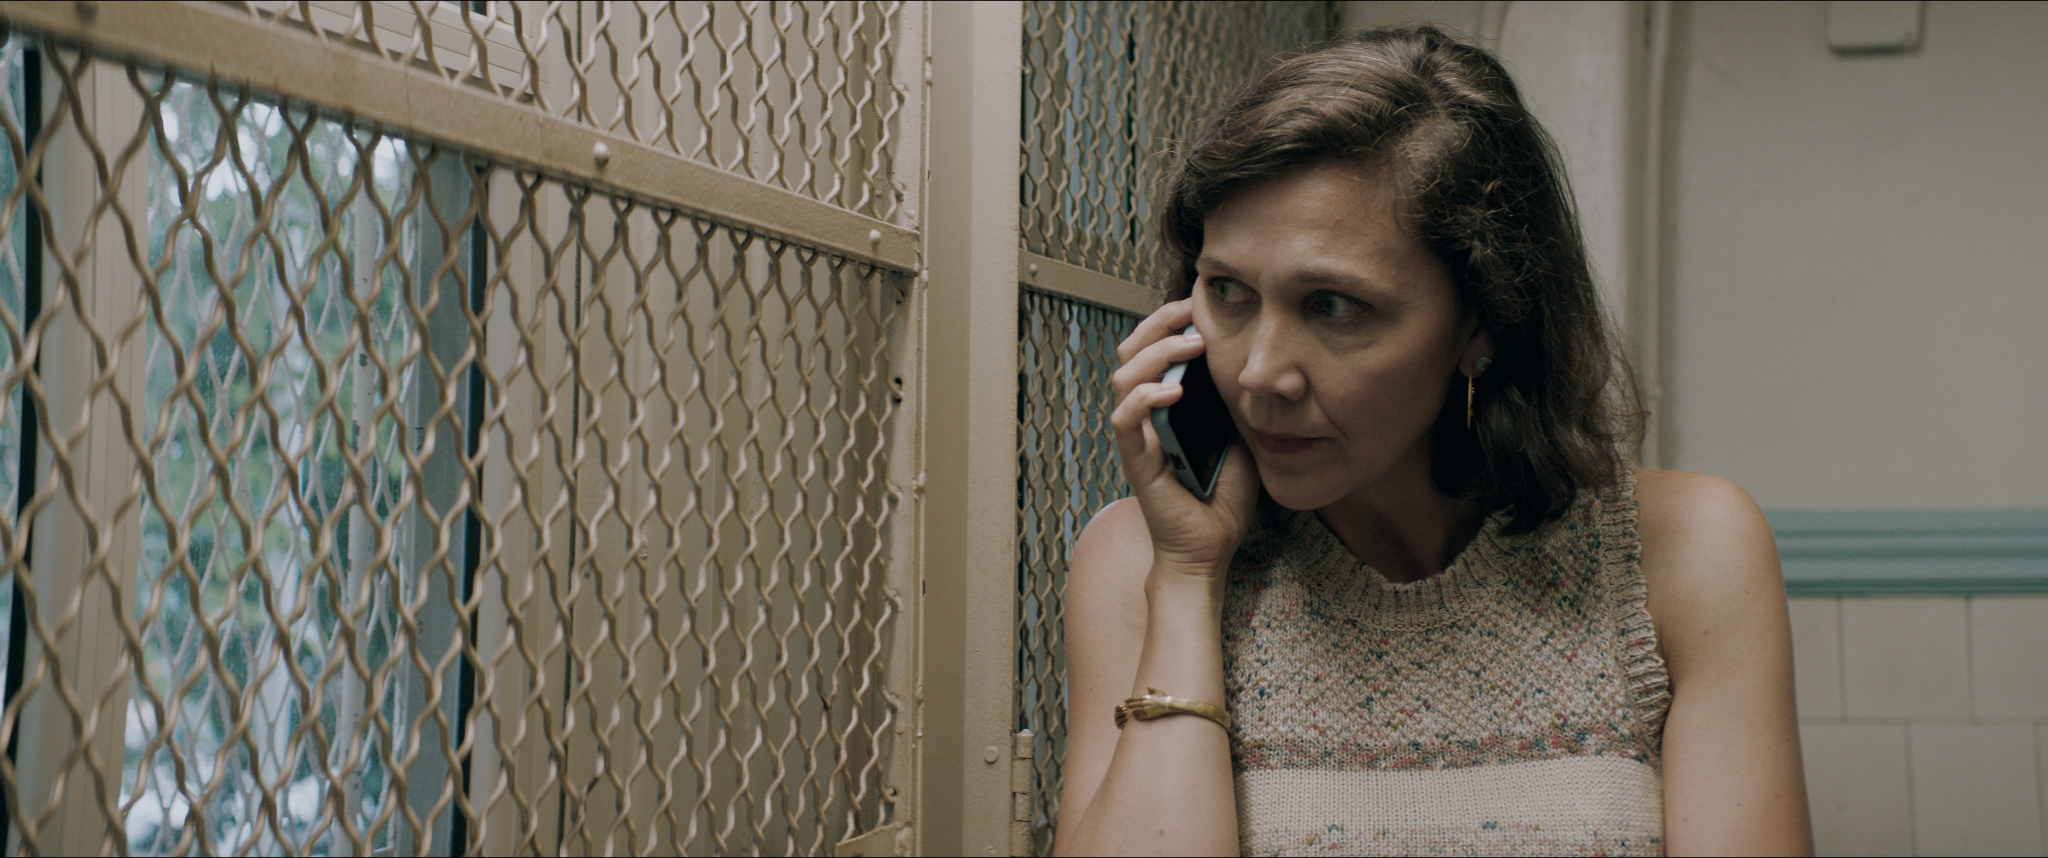 Maggie Gyllenhaal, wearing a beige sleeveless sweater, is holding a cell phone, looking to her left through a beige chain-link barrier.